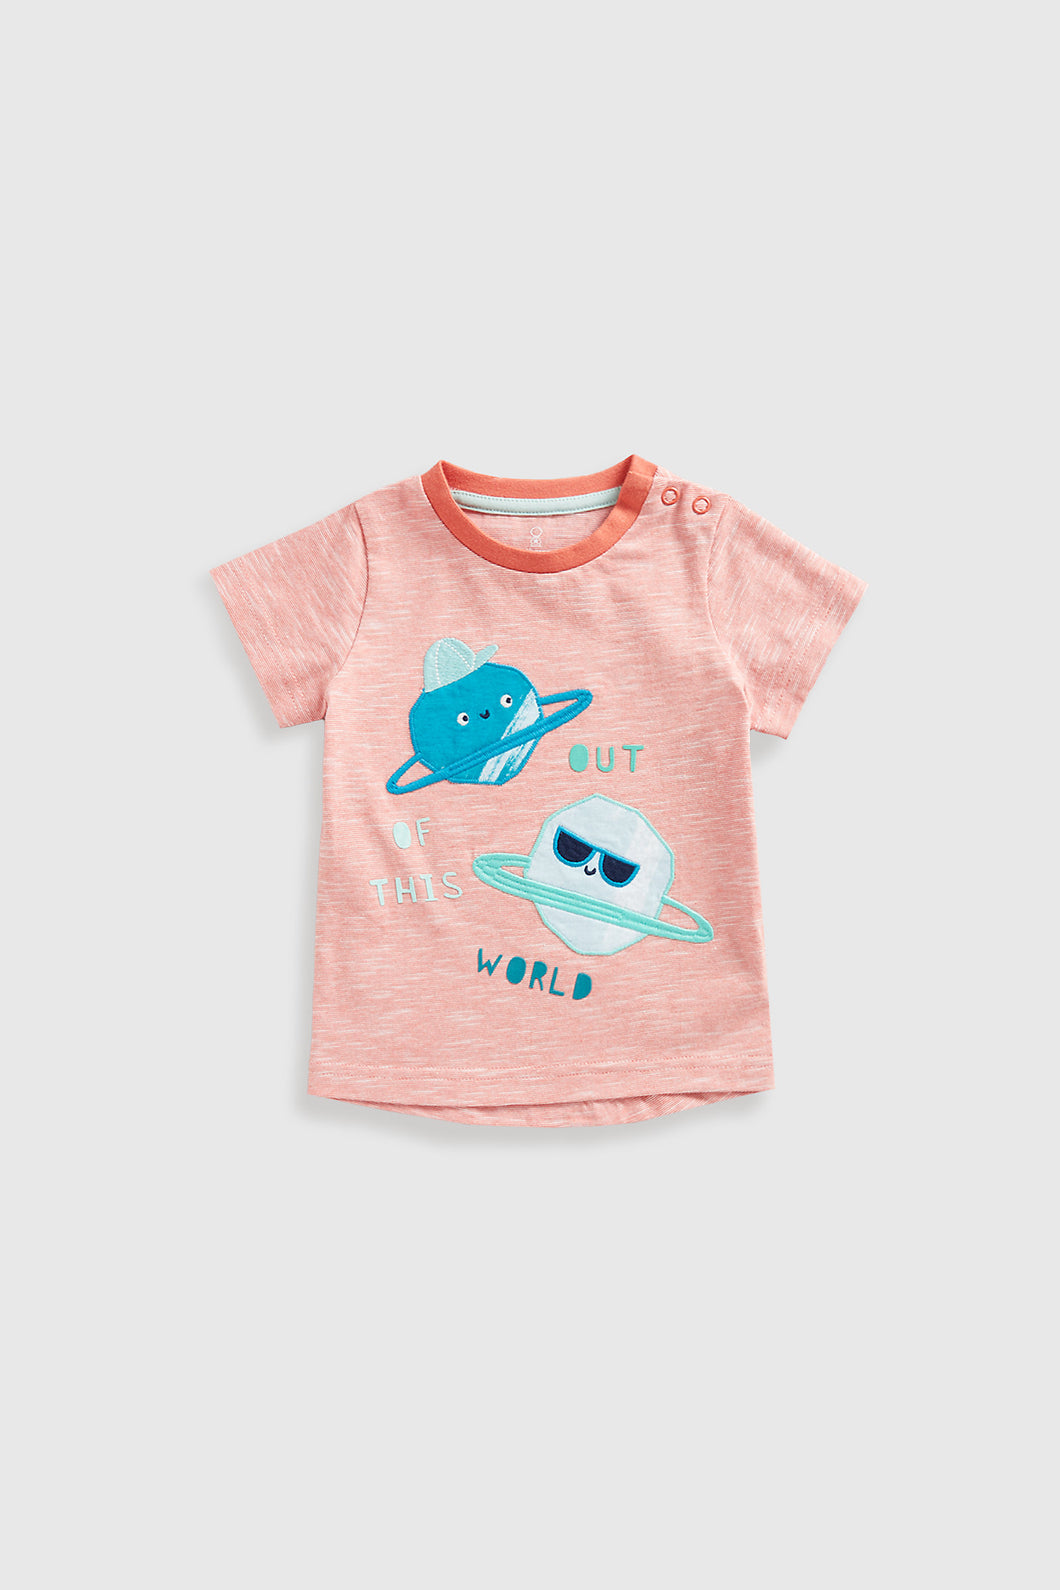 Mothercare Out Of This World T-Shirt